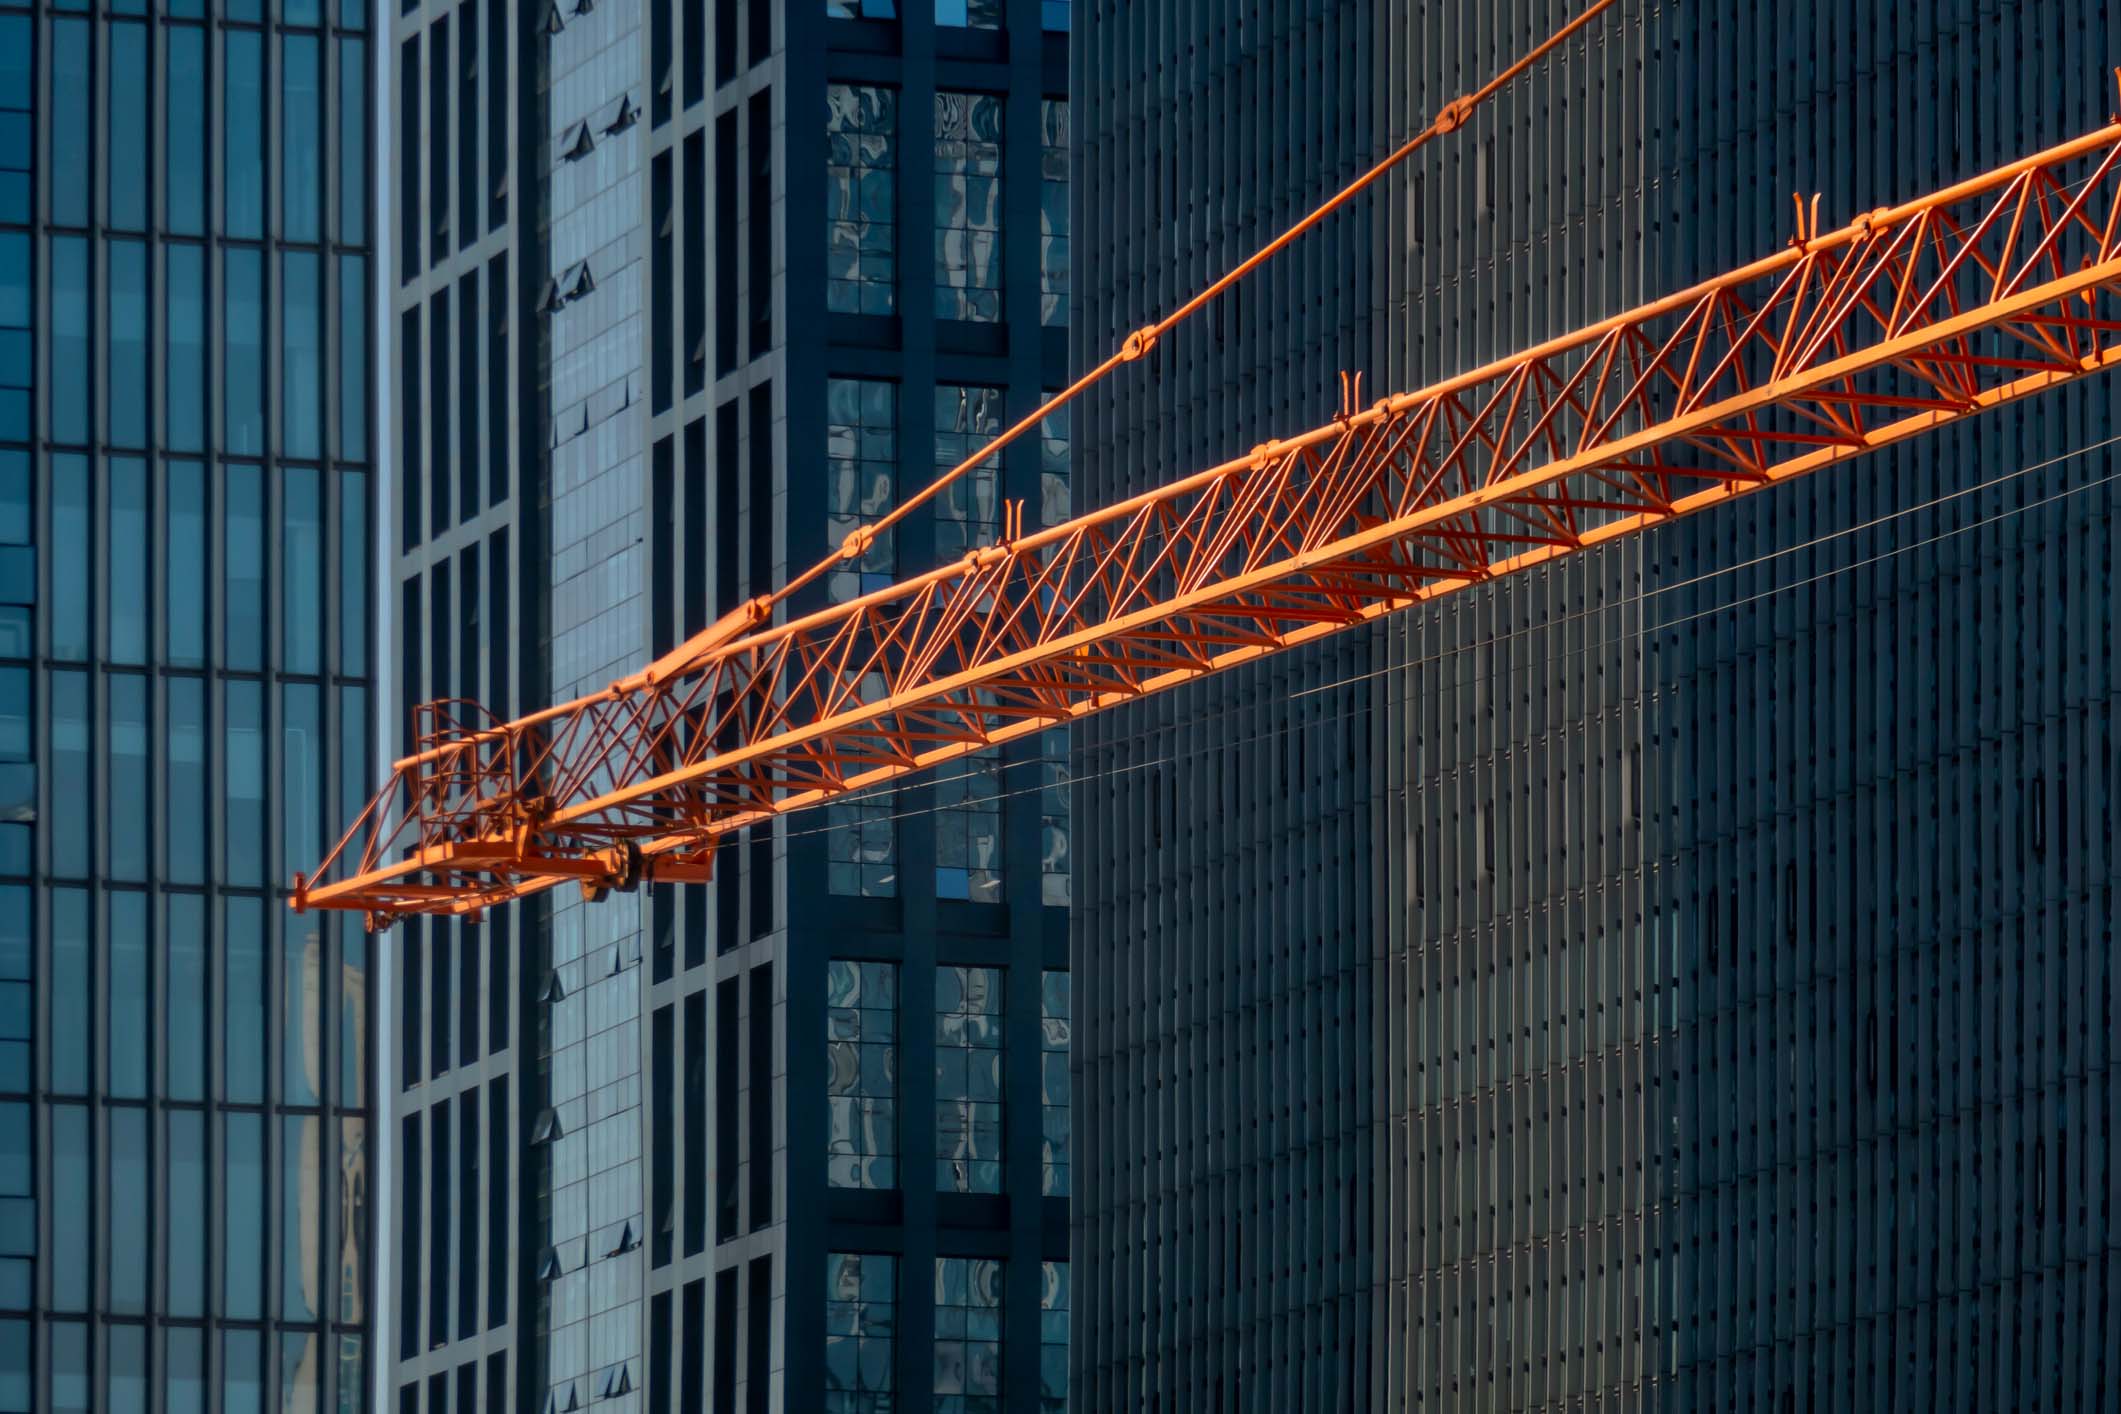 Crane operating on a construction site